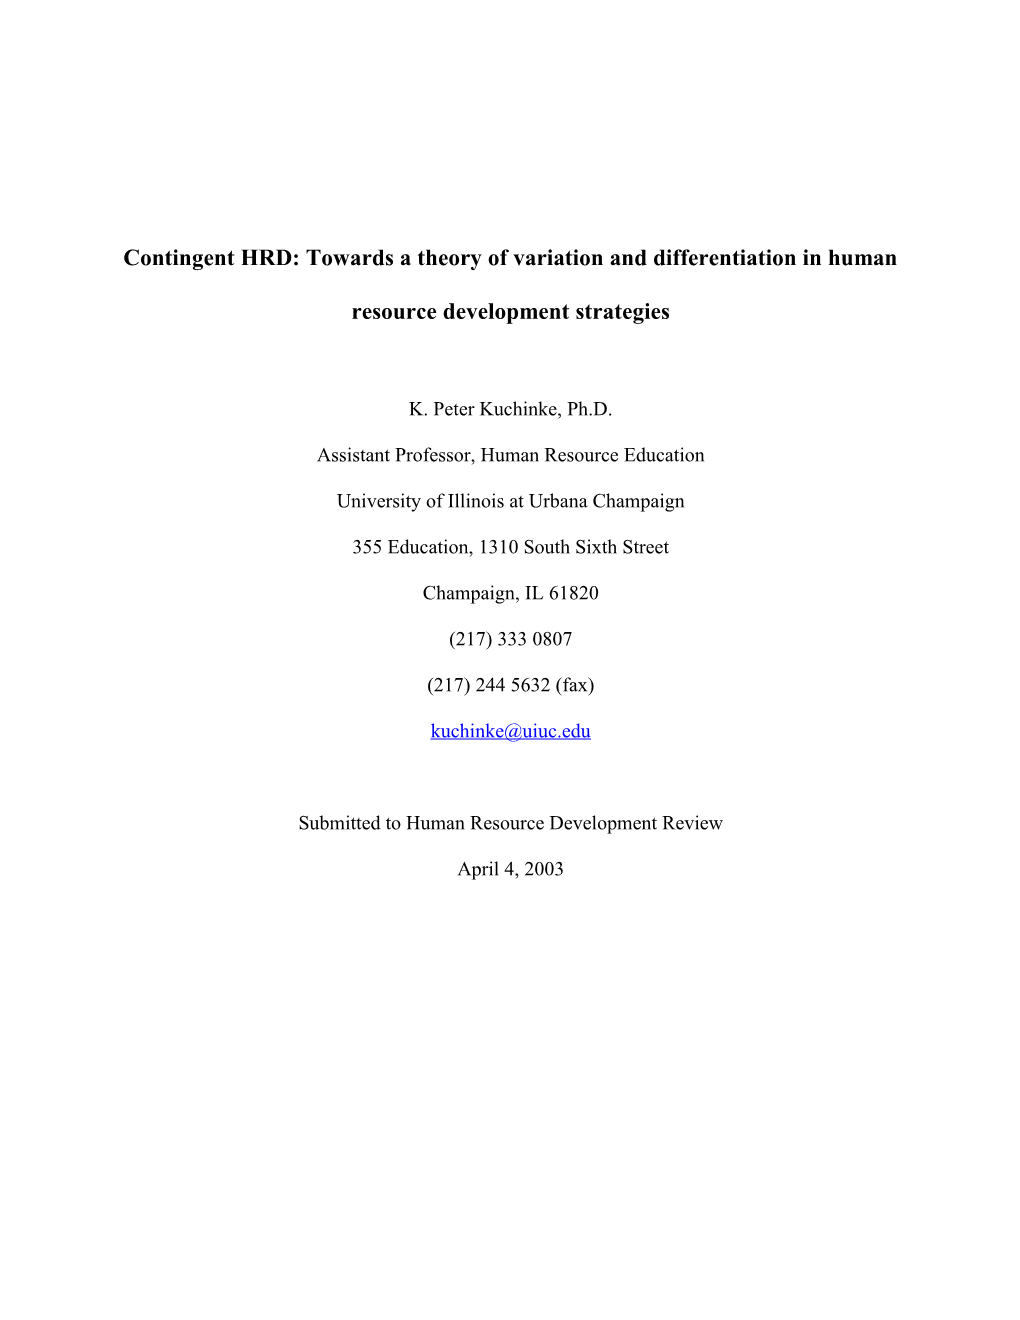 Contingent HRD: Towards a Theory of Variation and Differentiation in Human Resource Development